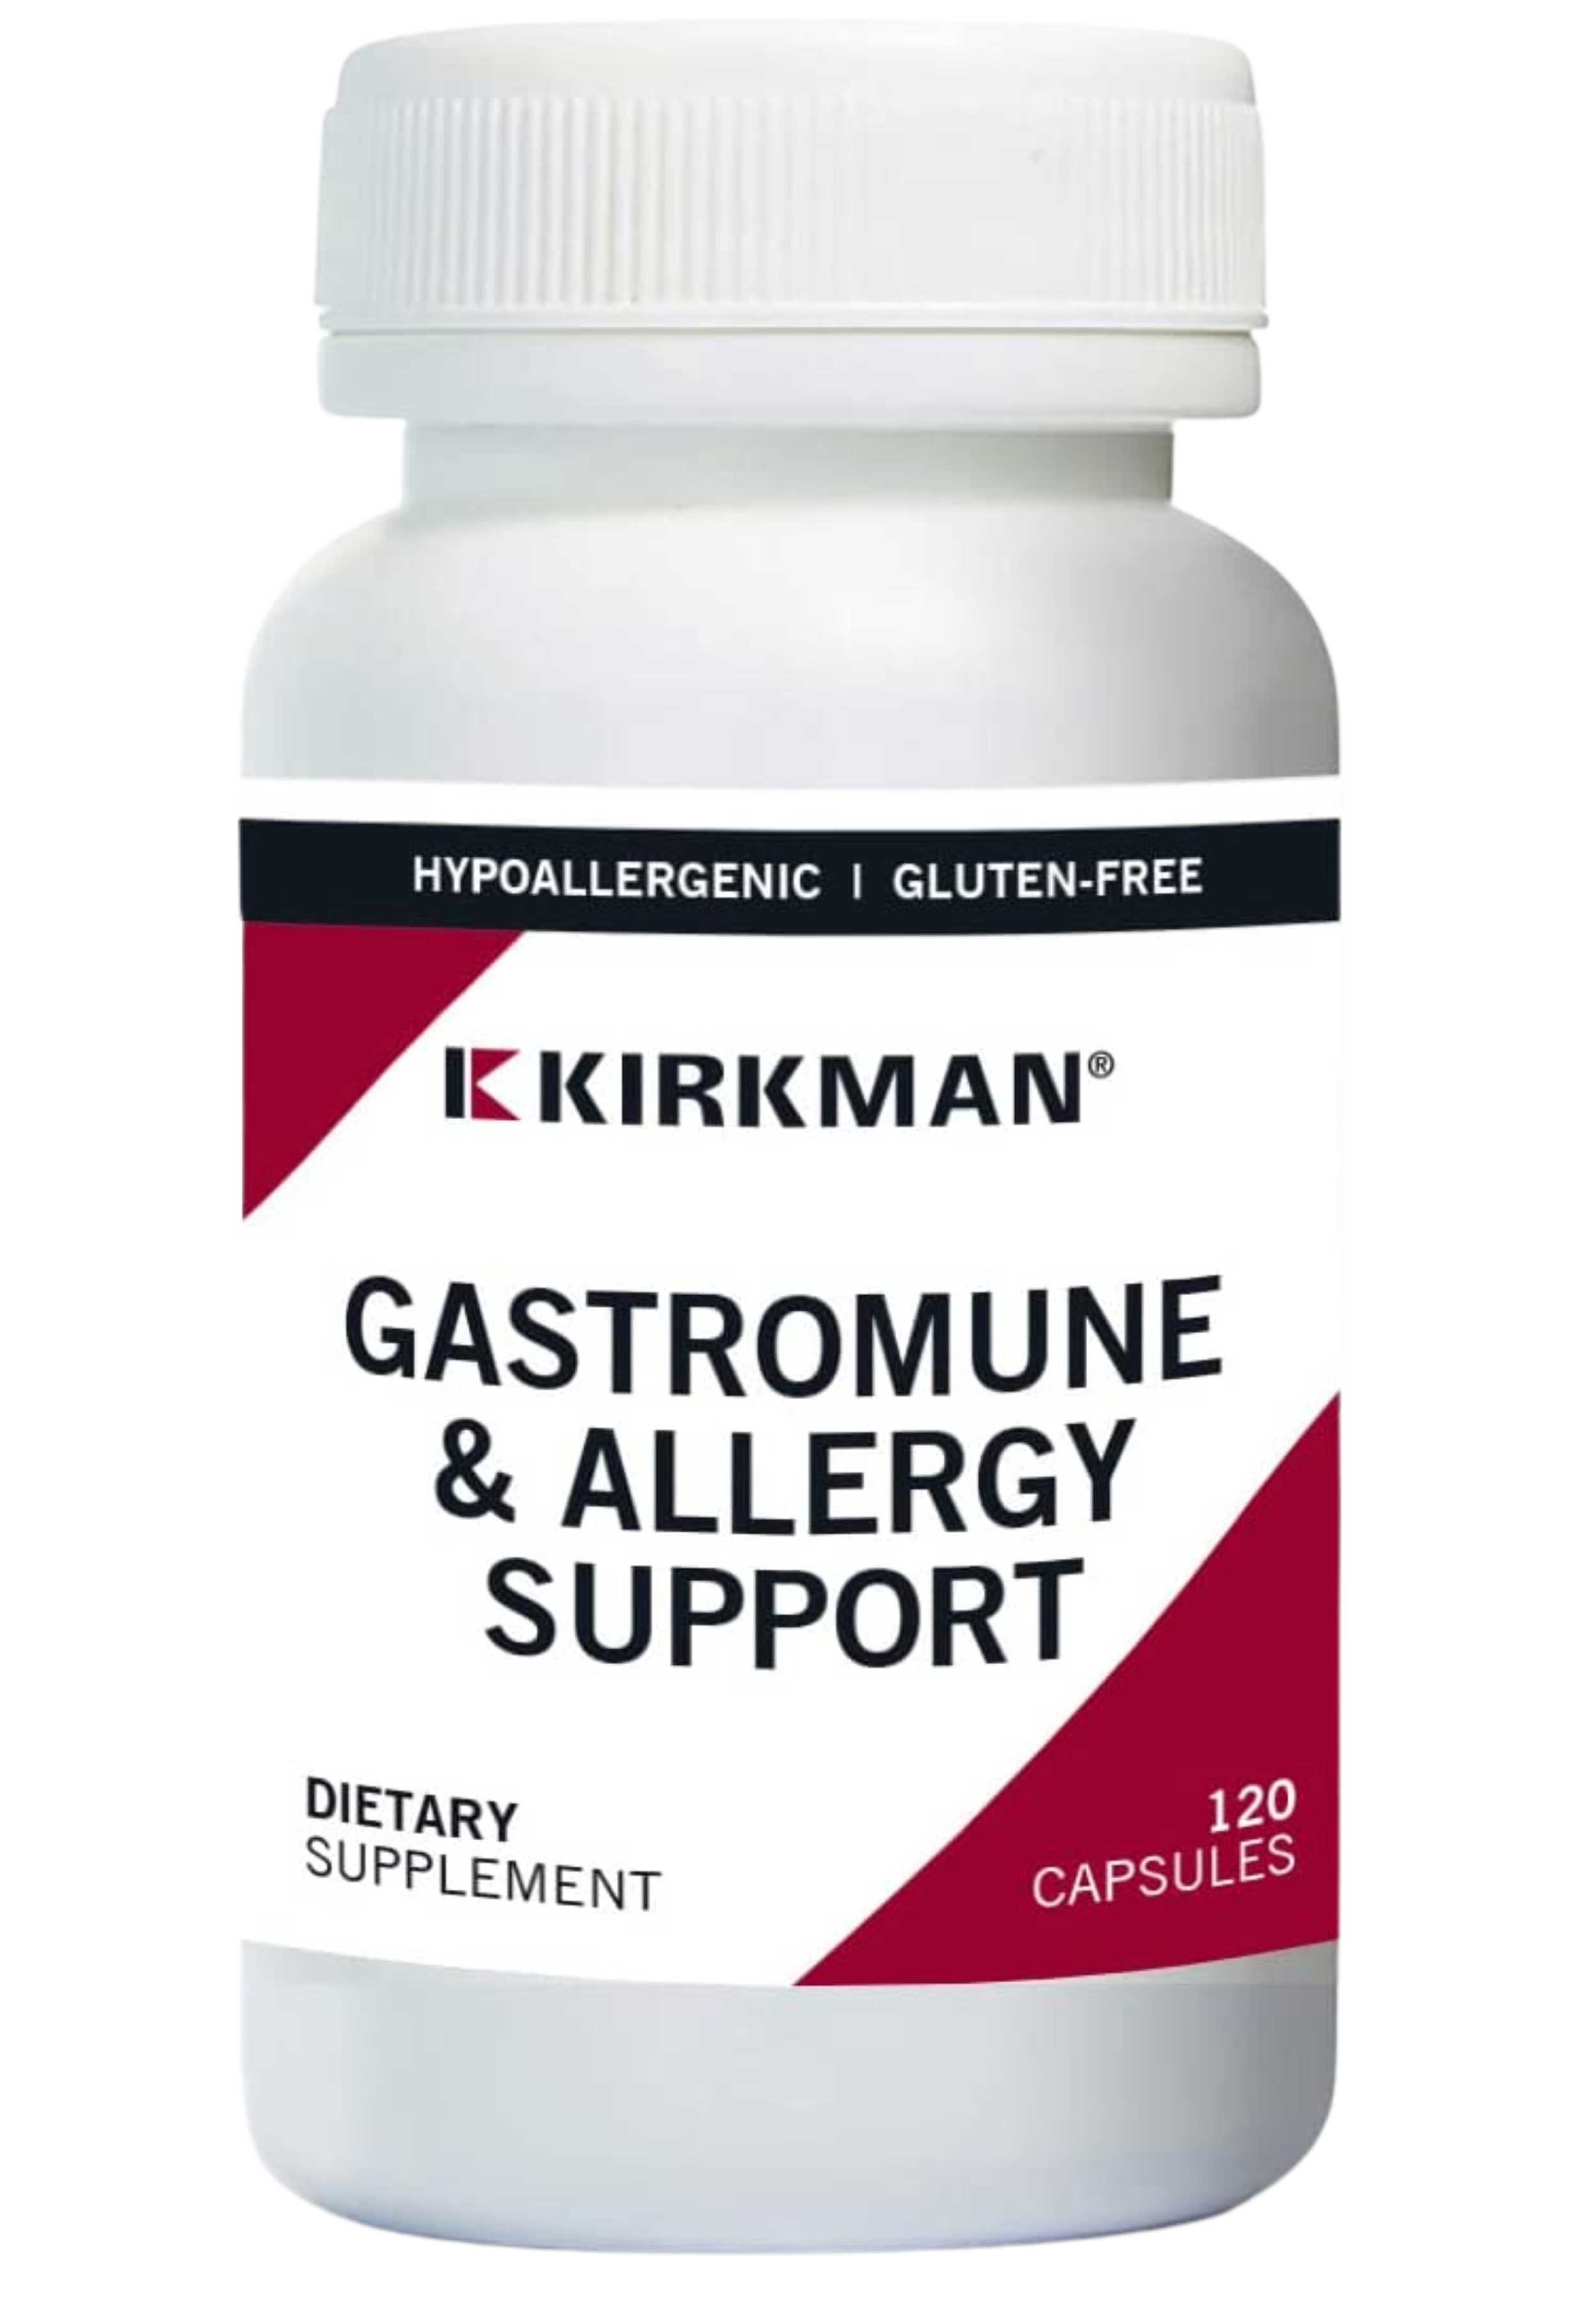 Kirkman Gastromune and Allergy Support